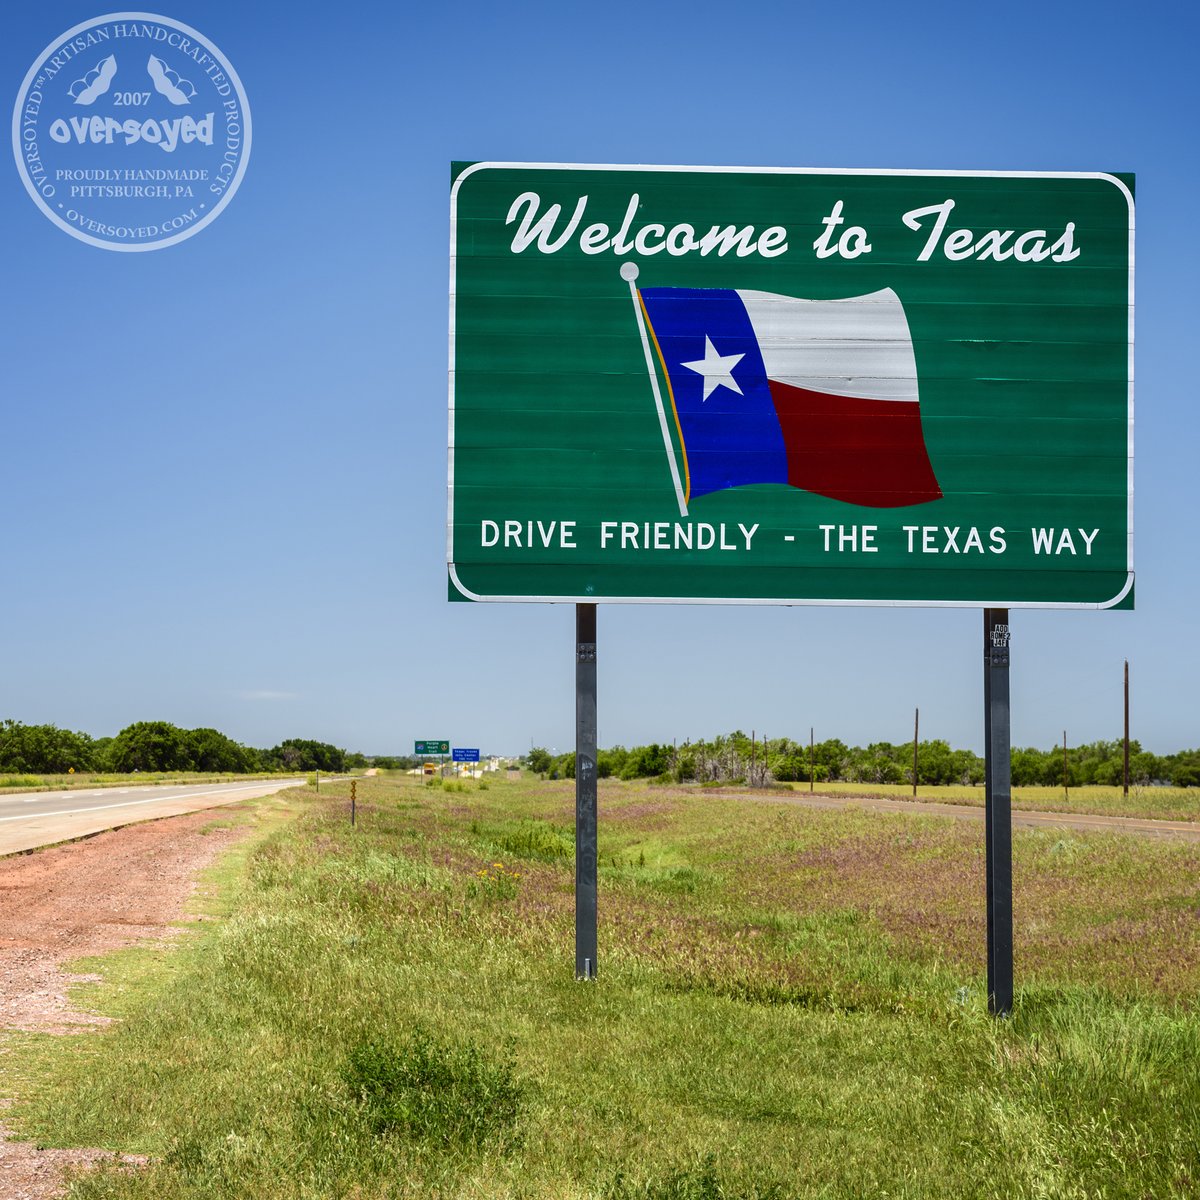 🇺🇸 #NationalTexasDay 🇺🇸

oversoyed.com/collections/na…

#TexasDay #Texas #OverSoyed #Handmade #Natural #SkinCare #ShopLocal #Selfcare #SupportSmallBusiness #ShopSmall #Scent #Handcrafted #Candles #Perfume #Bath #Artisan #Fragrance #Grooming #Cologne #Beauty #SoyCandles #MensGrooming